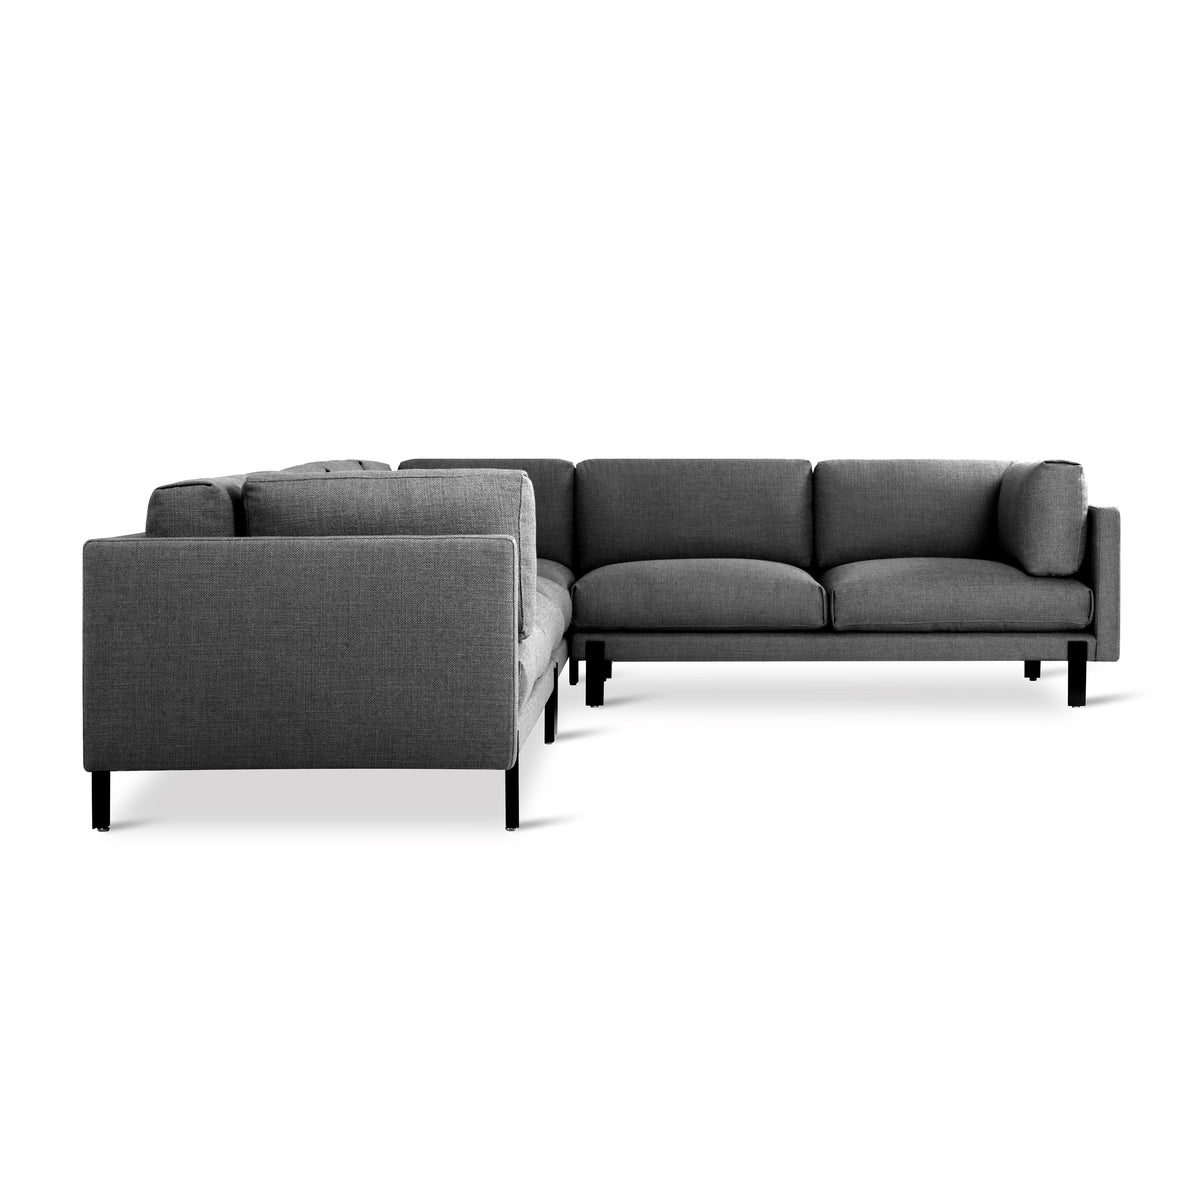 Silverlake XL Sectional - Right Facing